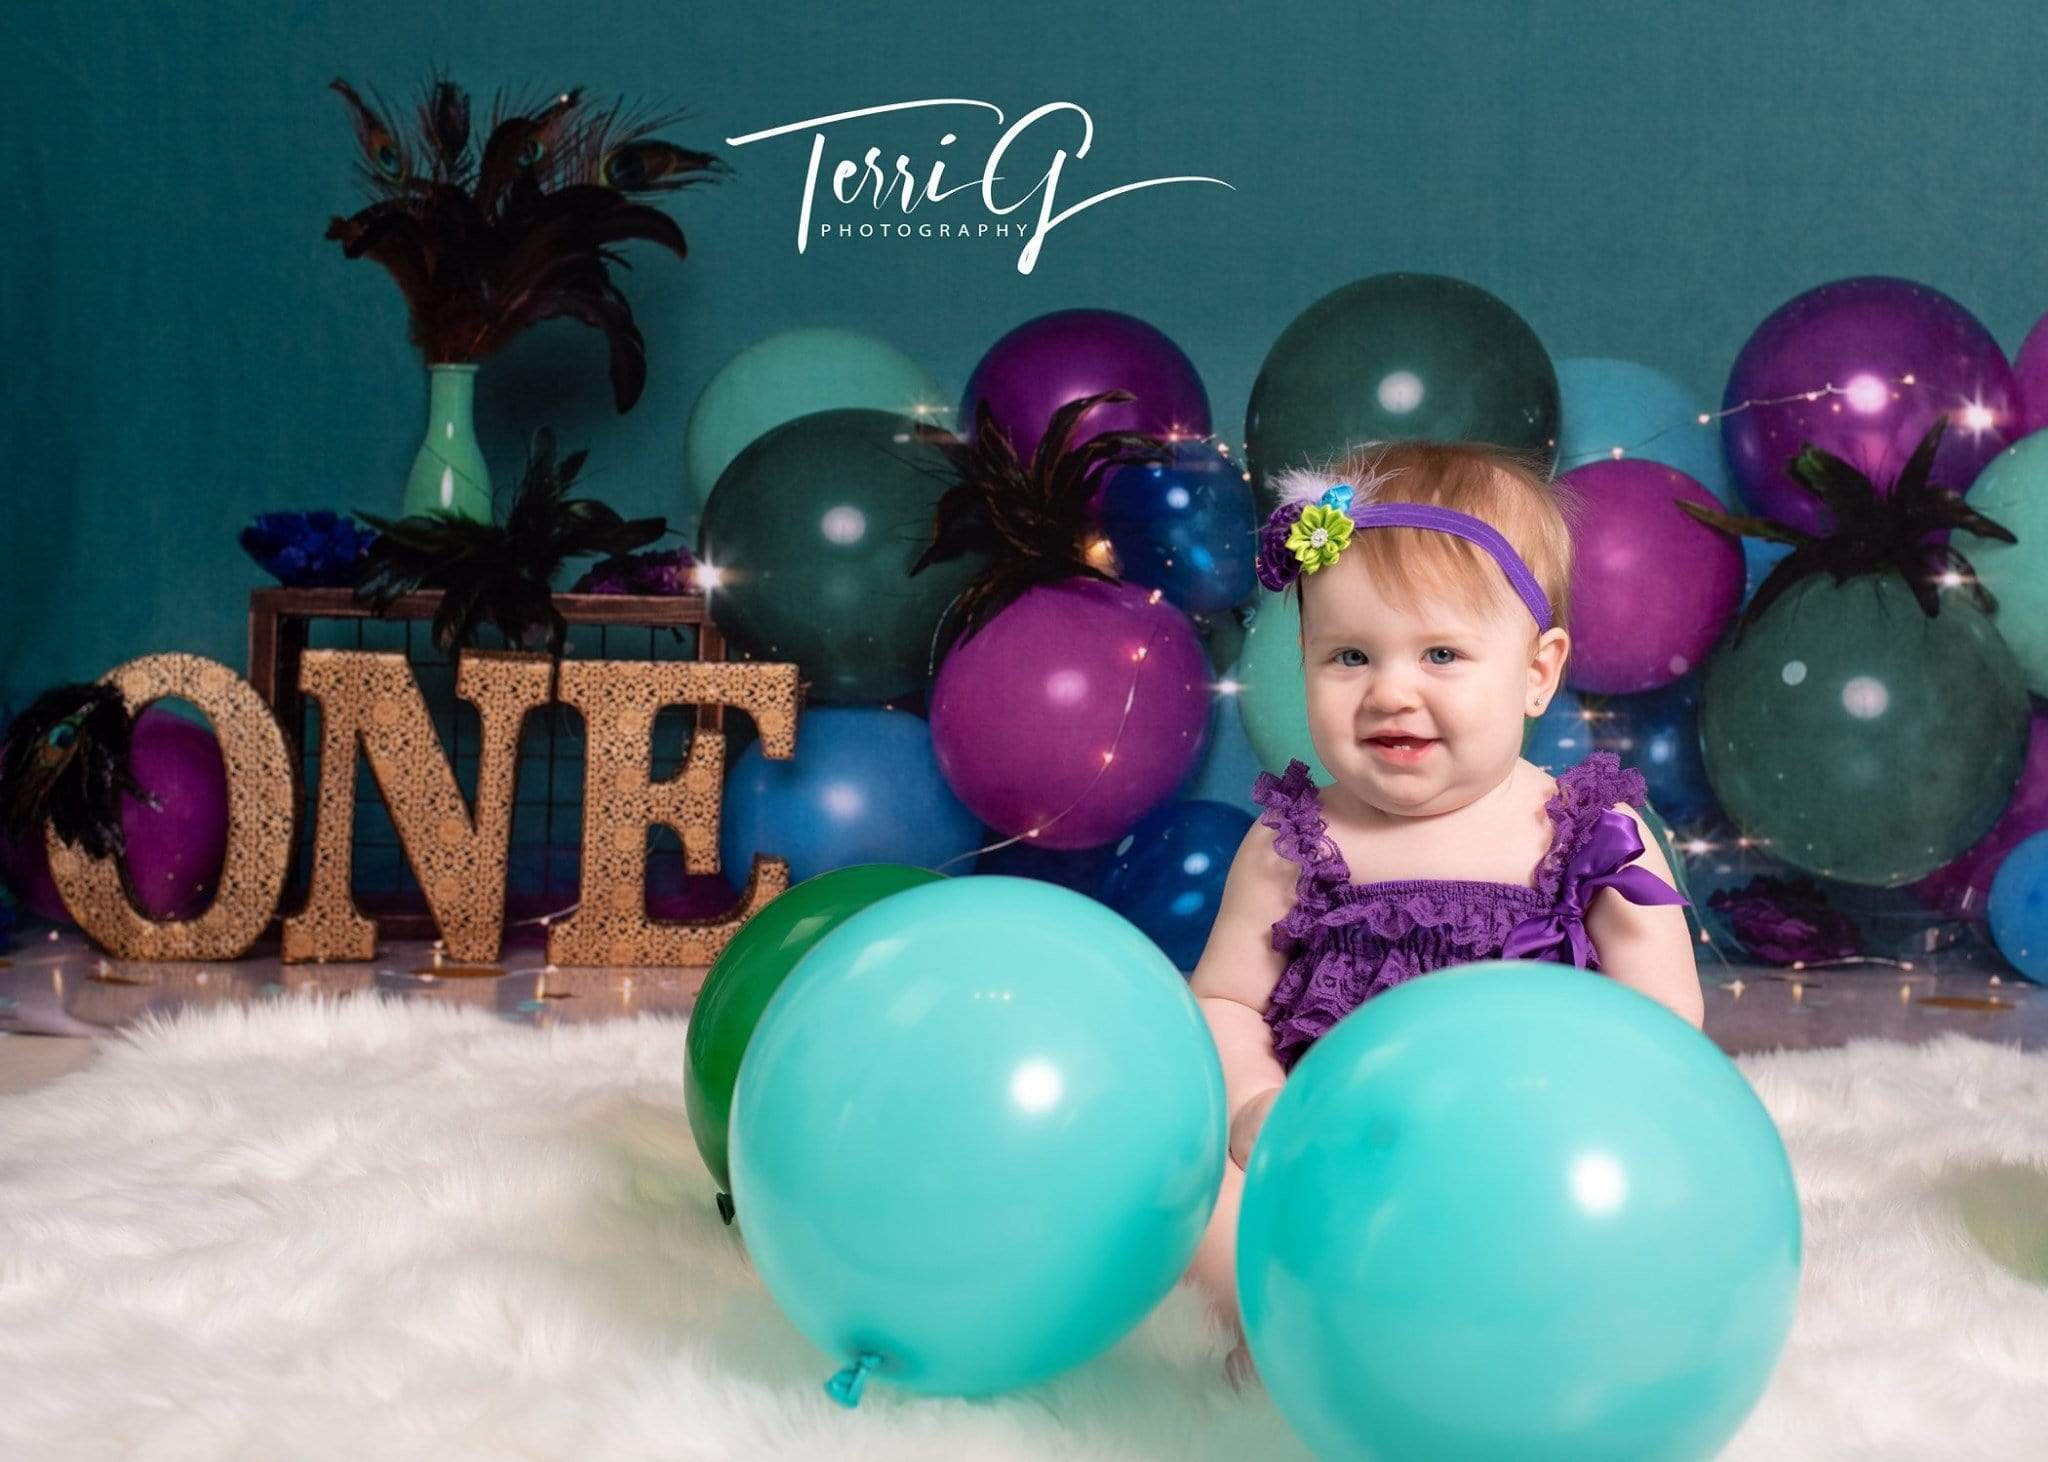 Katebackdrop£ºKate 1st Birthday with Balloons Backdrop for Photography Designed by Cassie Christiansen Photography